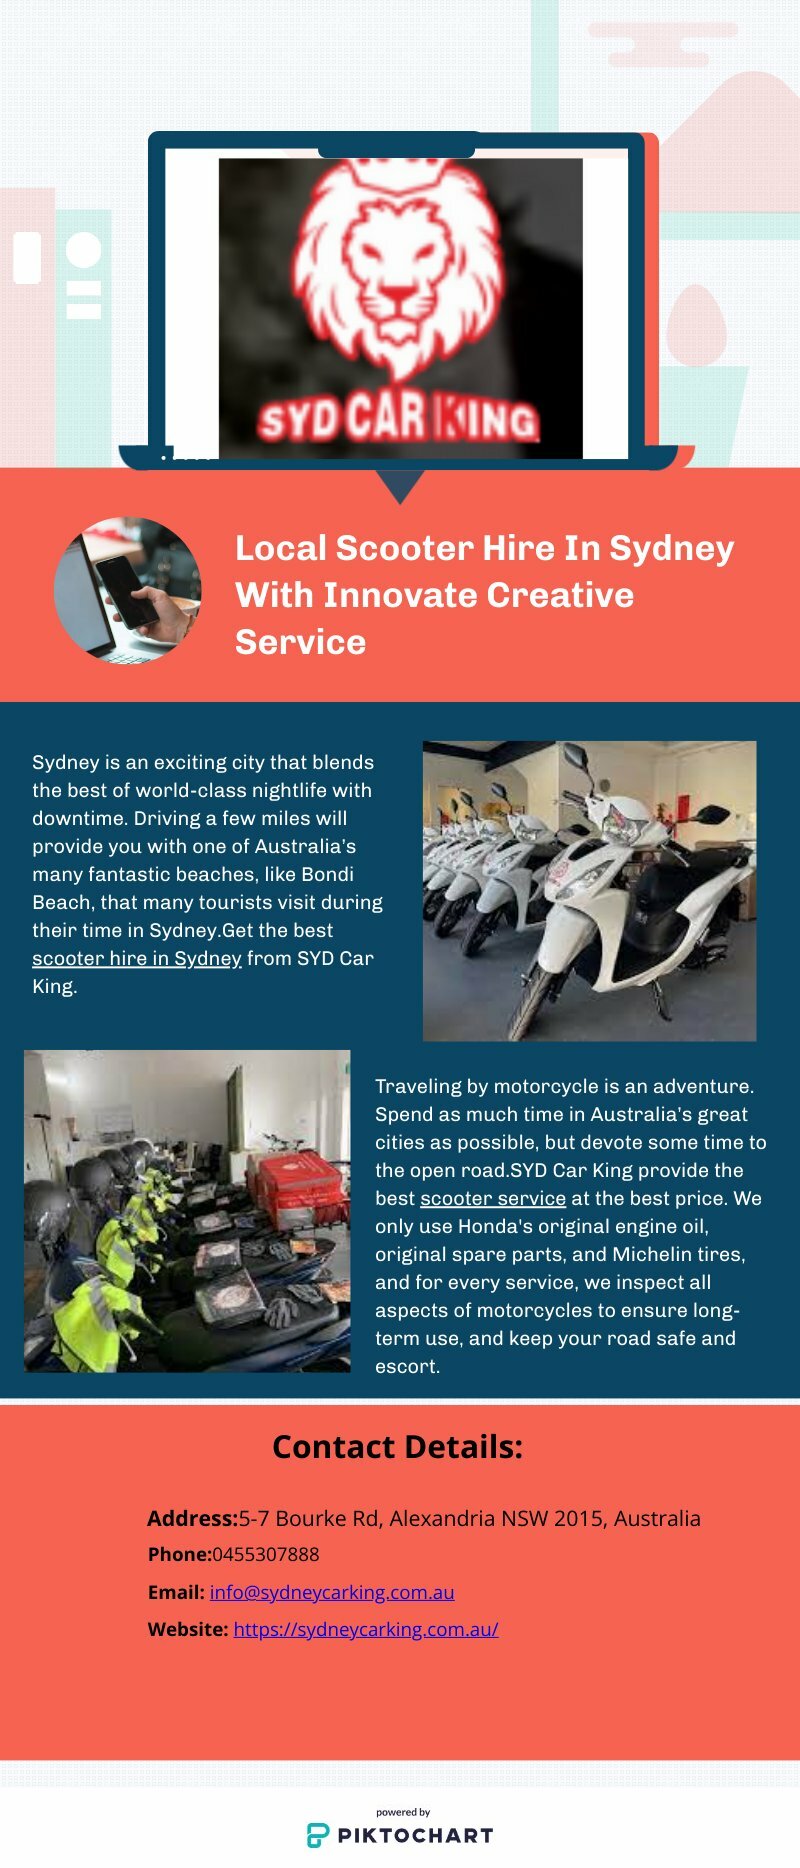 Local Scooter Hire In Sydney With Innovate Creative Service | Piktochart Visual Editor